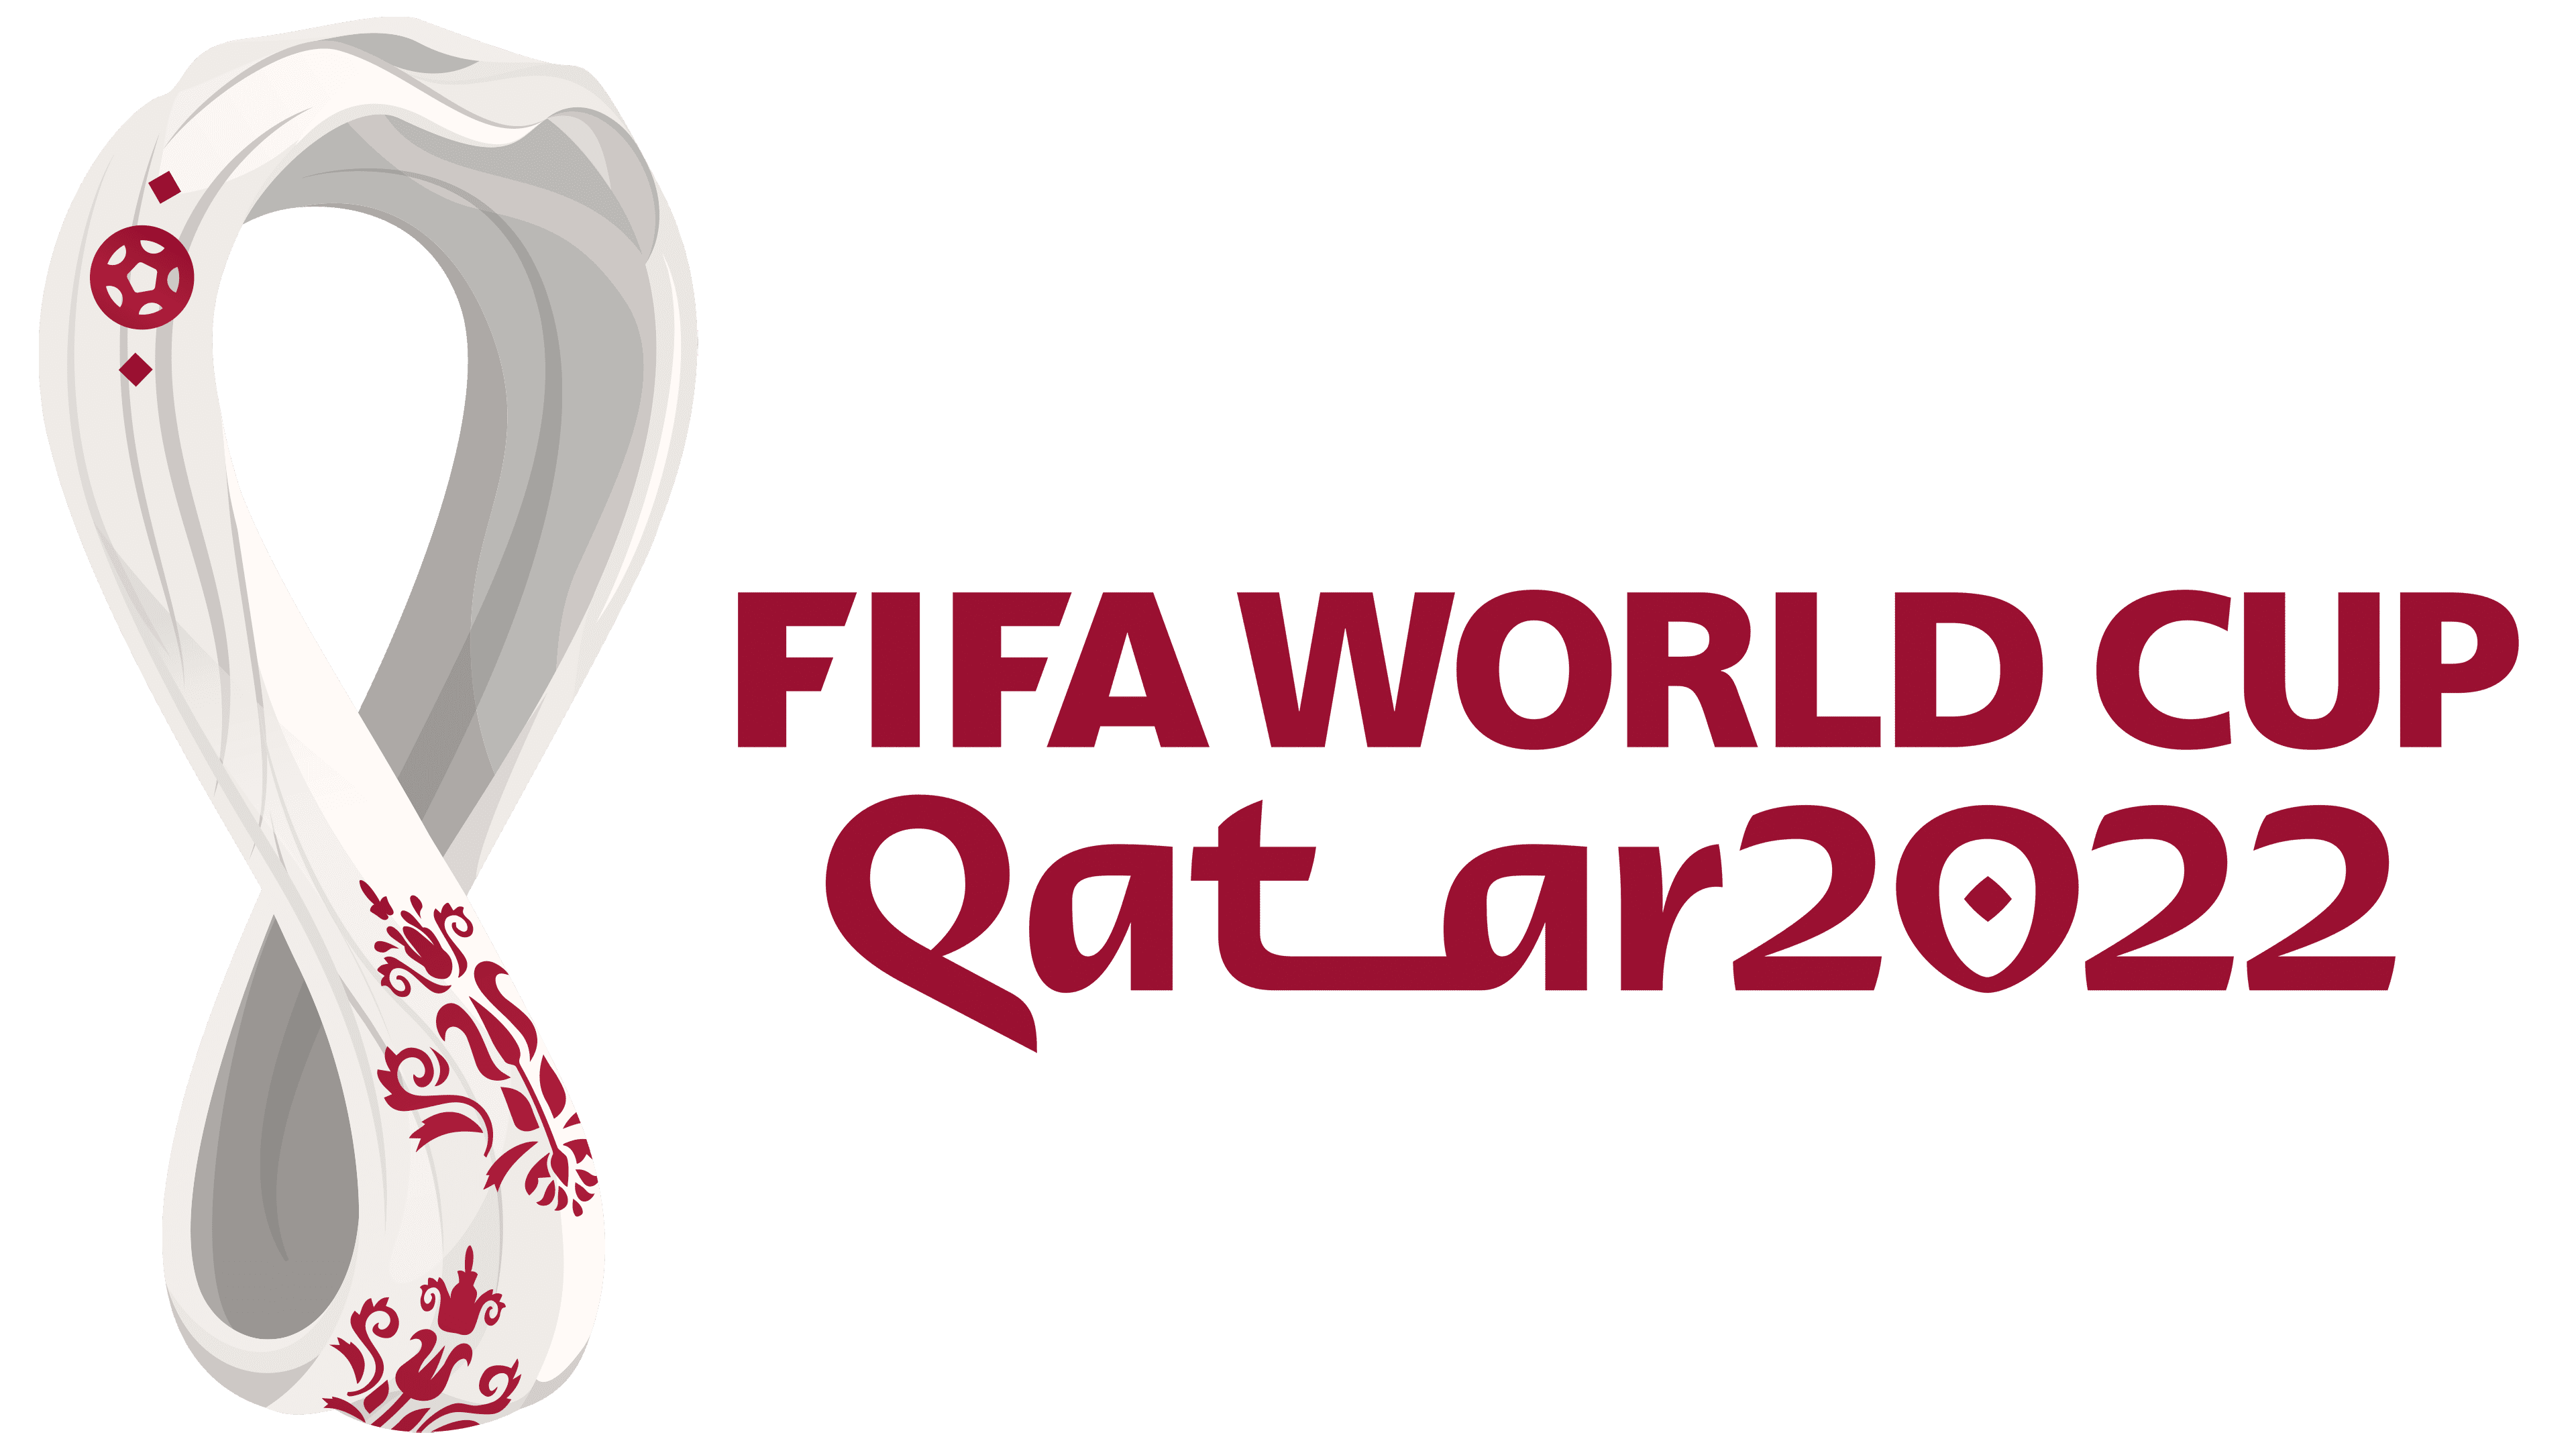 The 2022 FIFA World Cup logo: what it consists of and what it ...